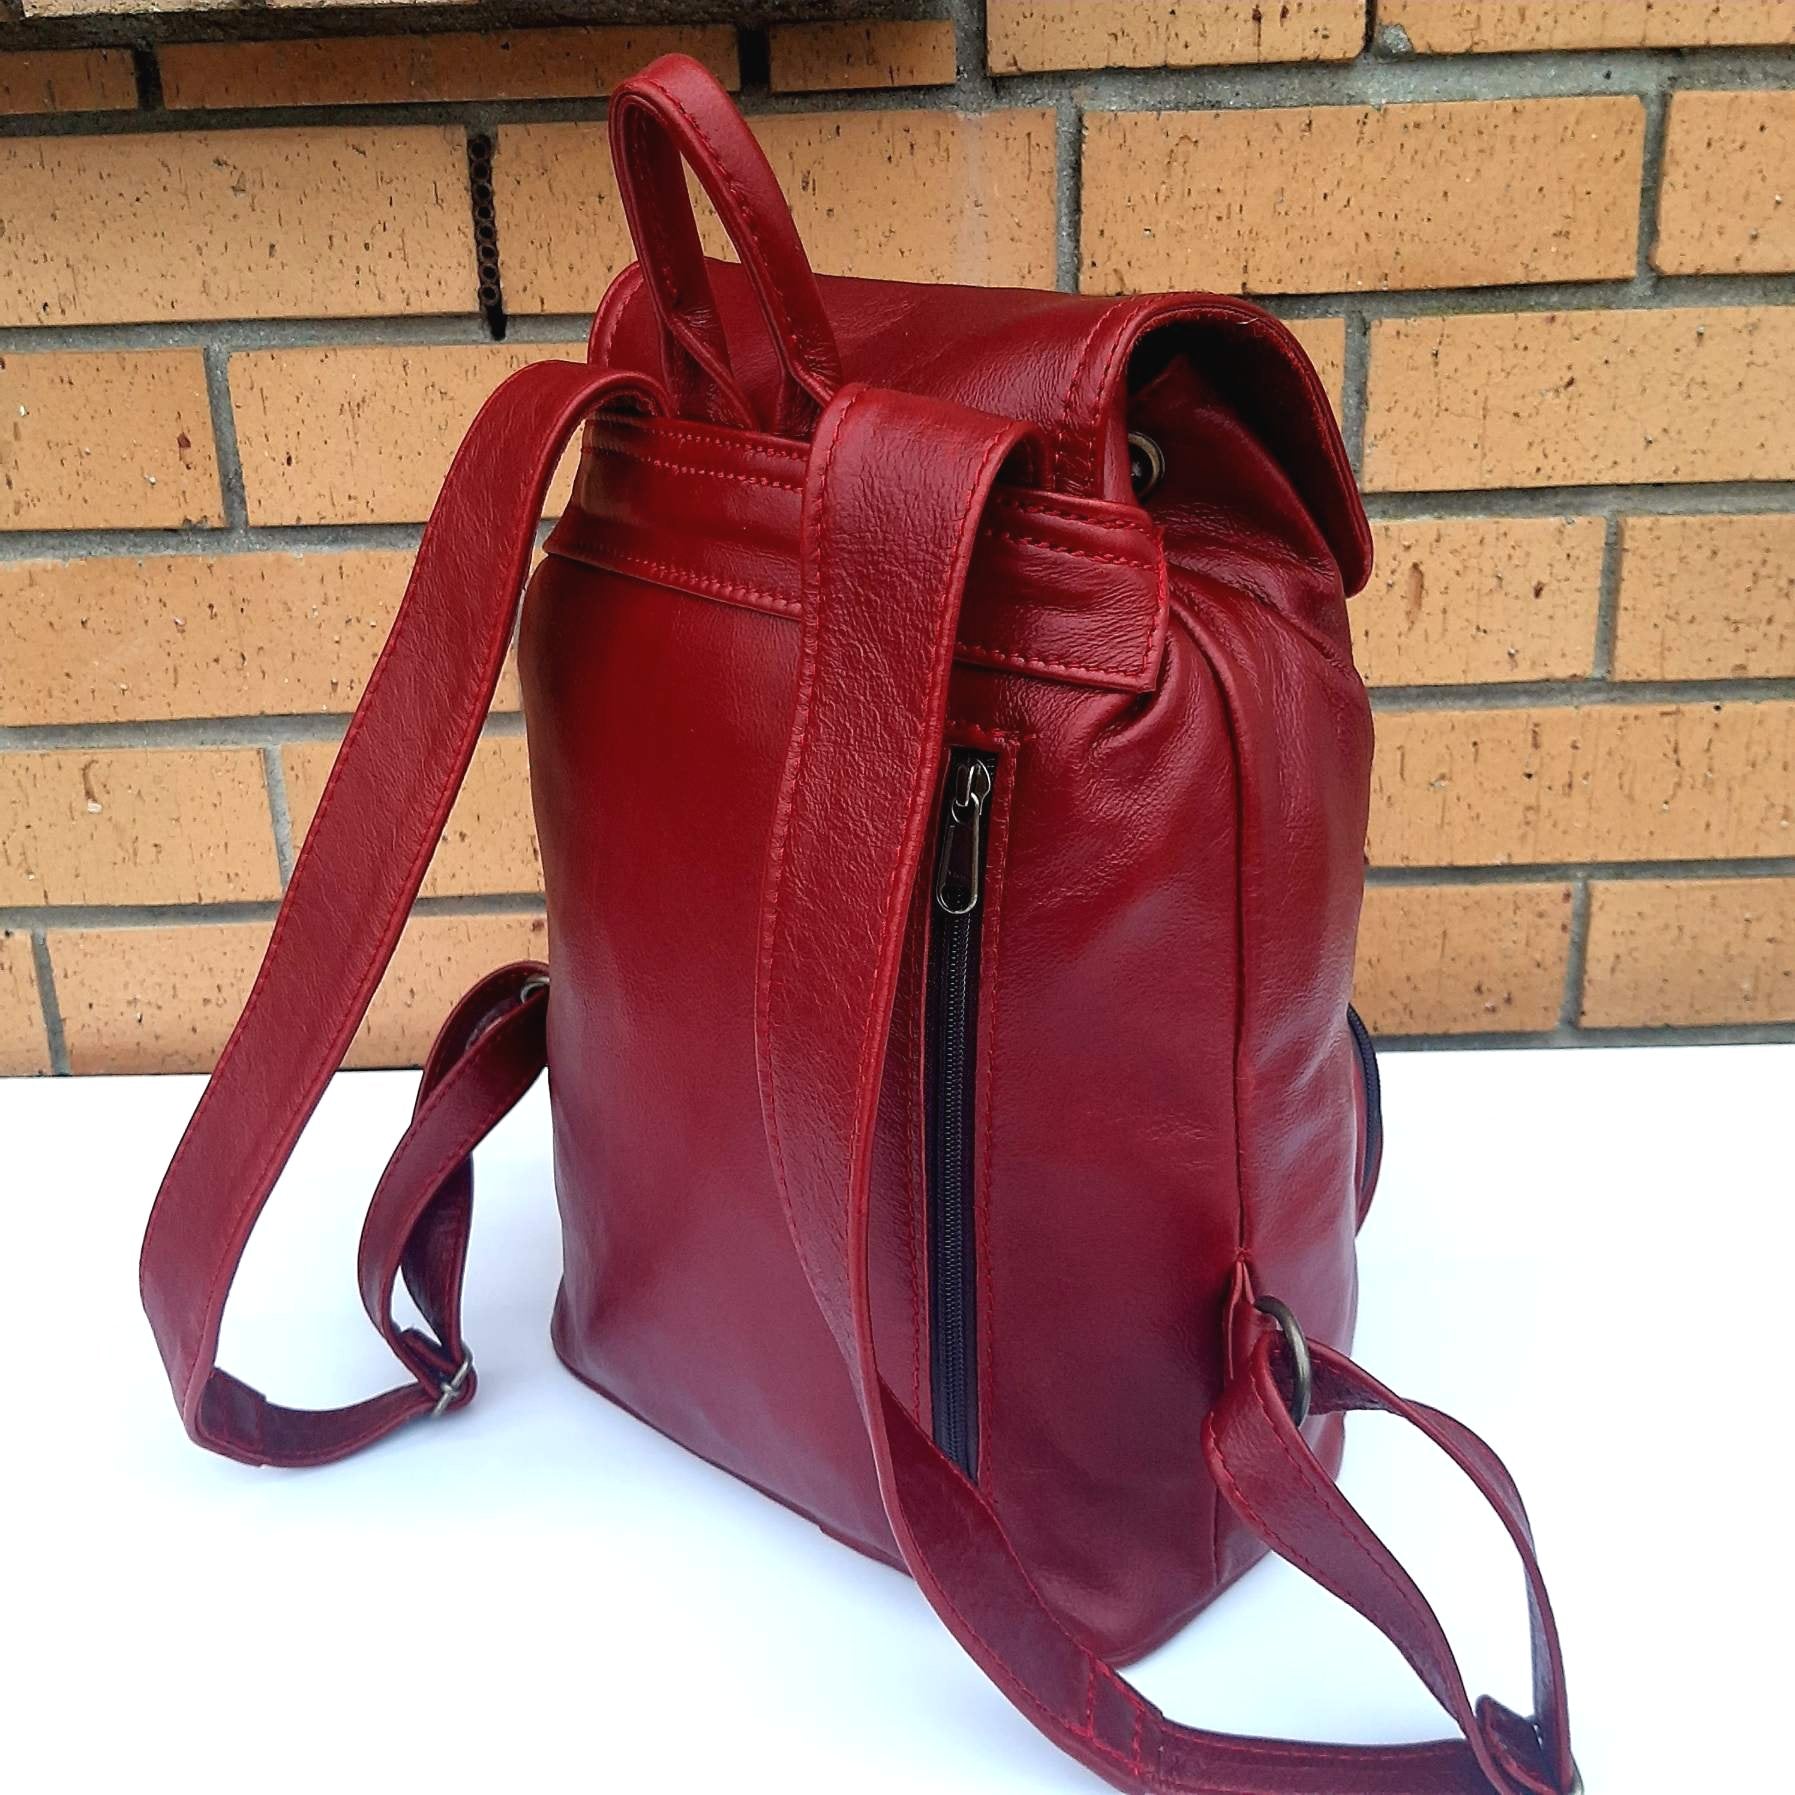 leather backpacks flap backside  in cherry red  colour made by Cape Masai Leather